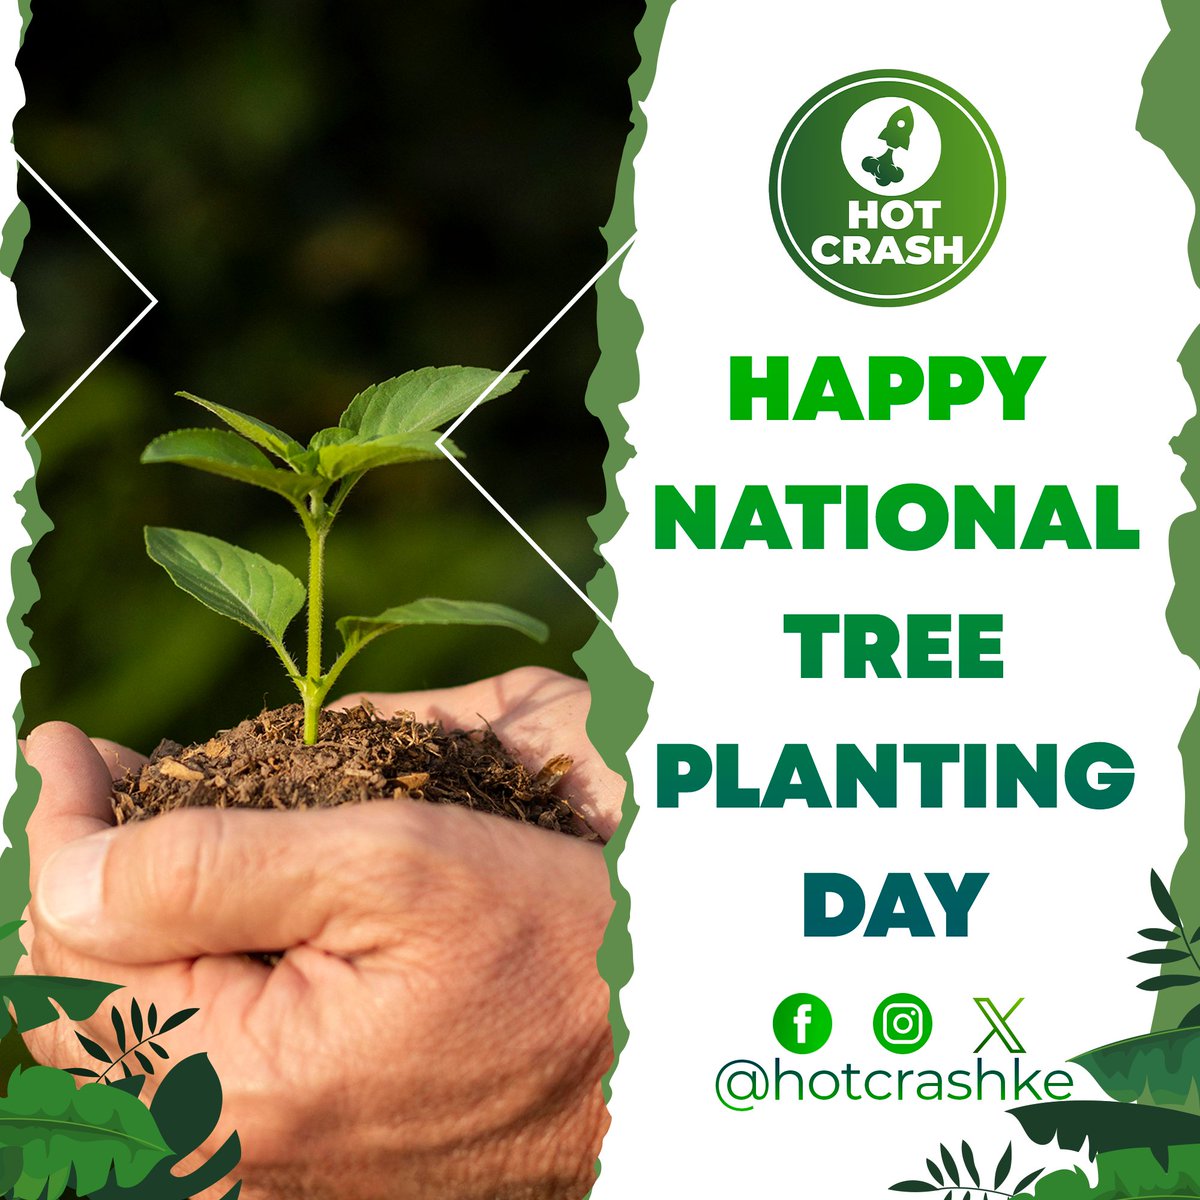 Happy National Tree Planting Day! Let's grow a greener tomorrow together! 🌱🌍 #PlantForThePlanet #GreenFuture #HappyNationalTreePlantingDay !